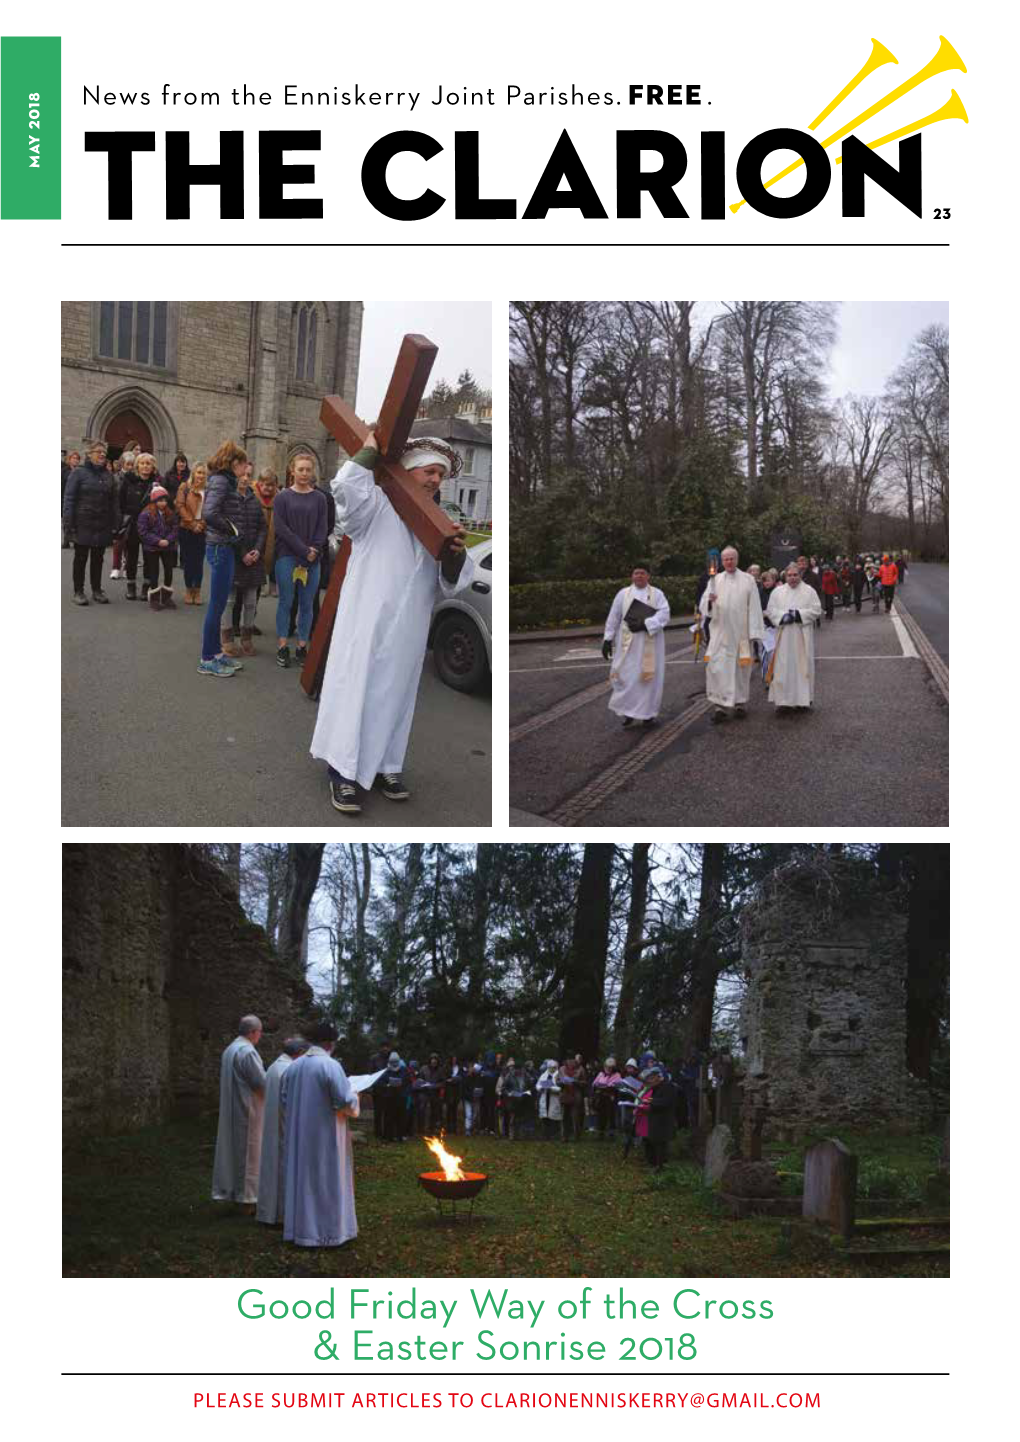 Good Friday Way of the Cross & Easter Sonrise 2018